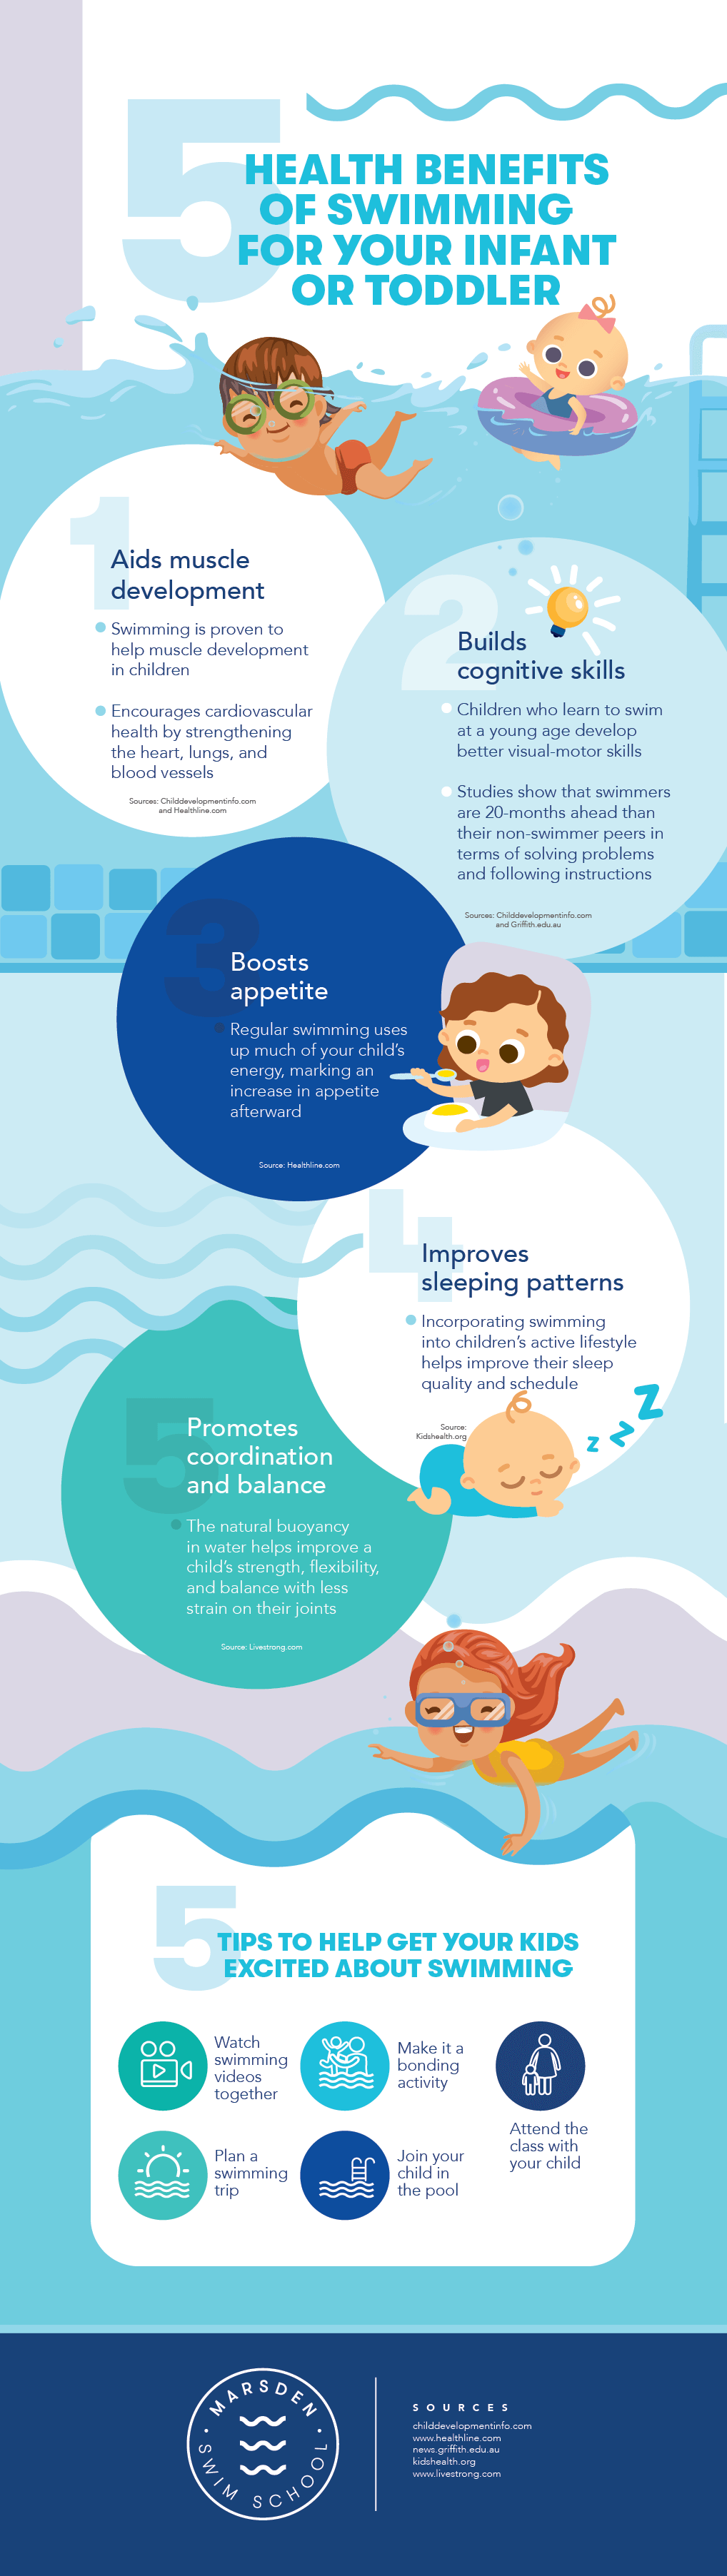 5 Health Benefits of Swimming for Your Infant or Toddler